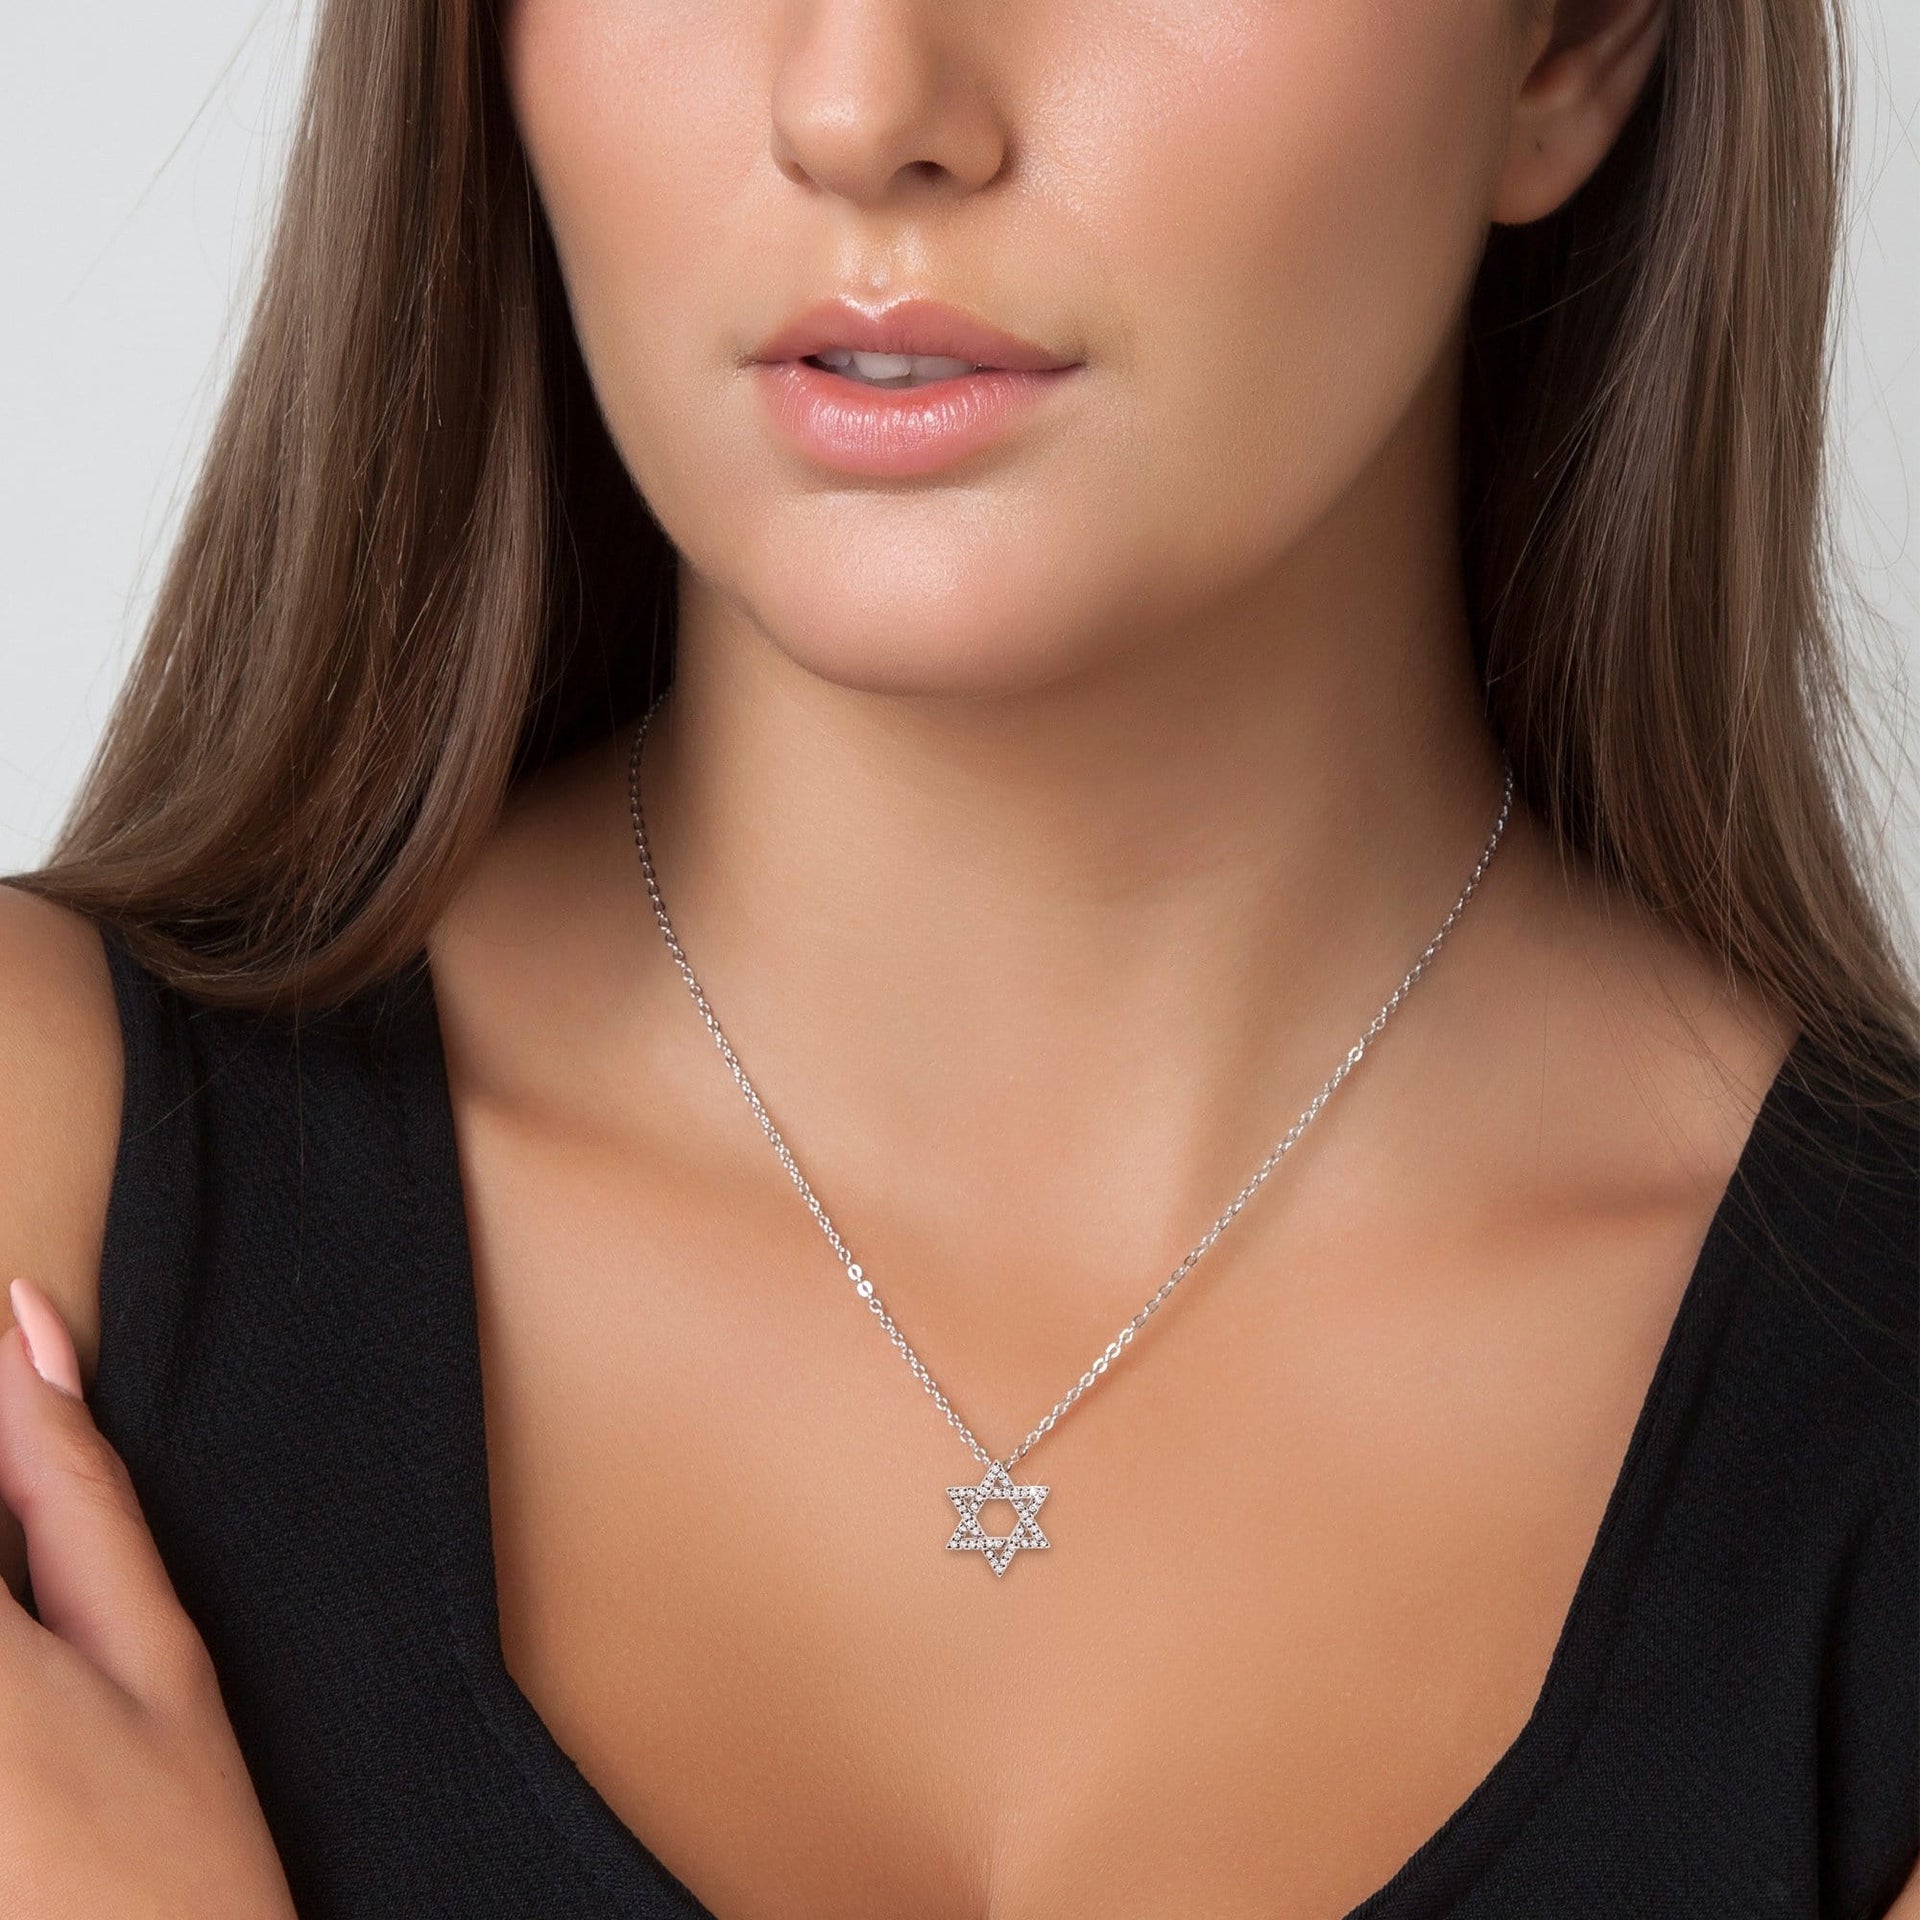 Alef Bet Necklaces Star of David Sparkling Diamond 14k Gold Necklace - Gold, White Gold or Rose Gold